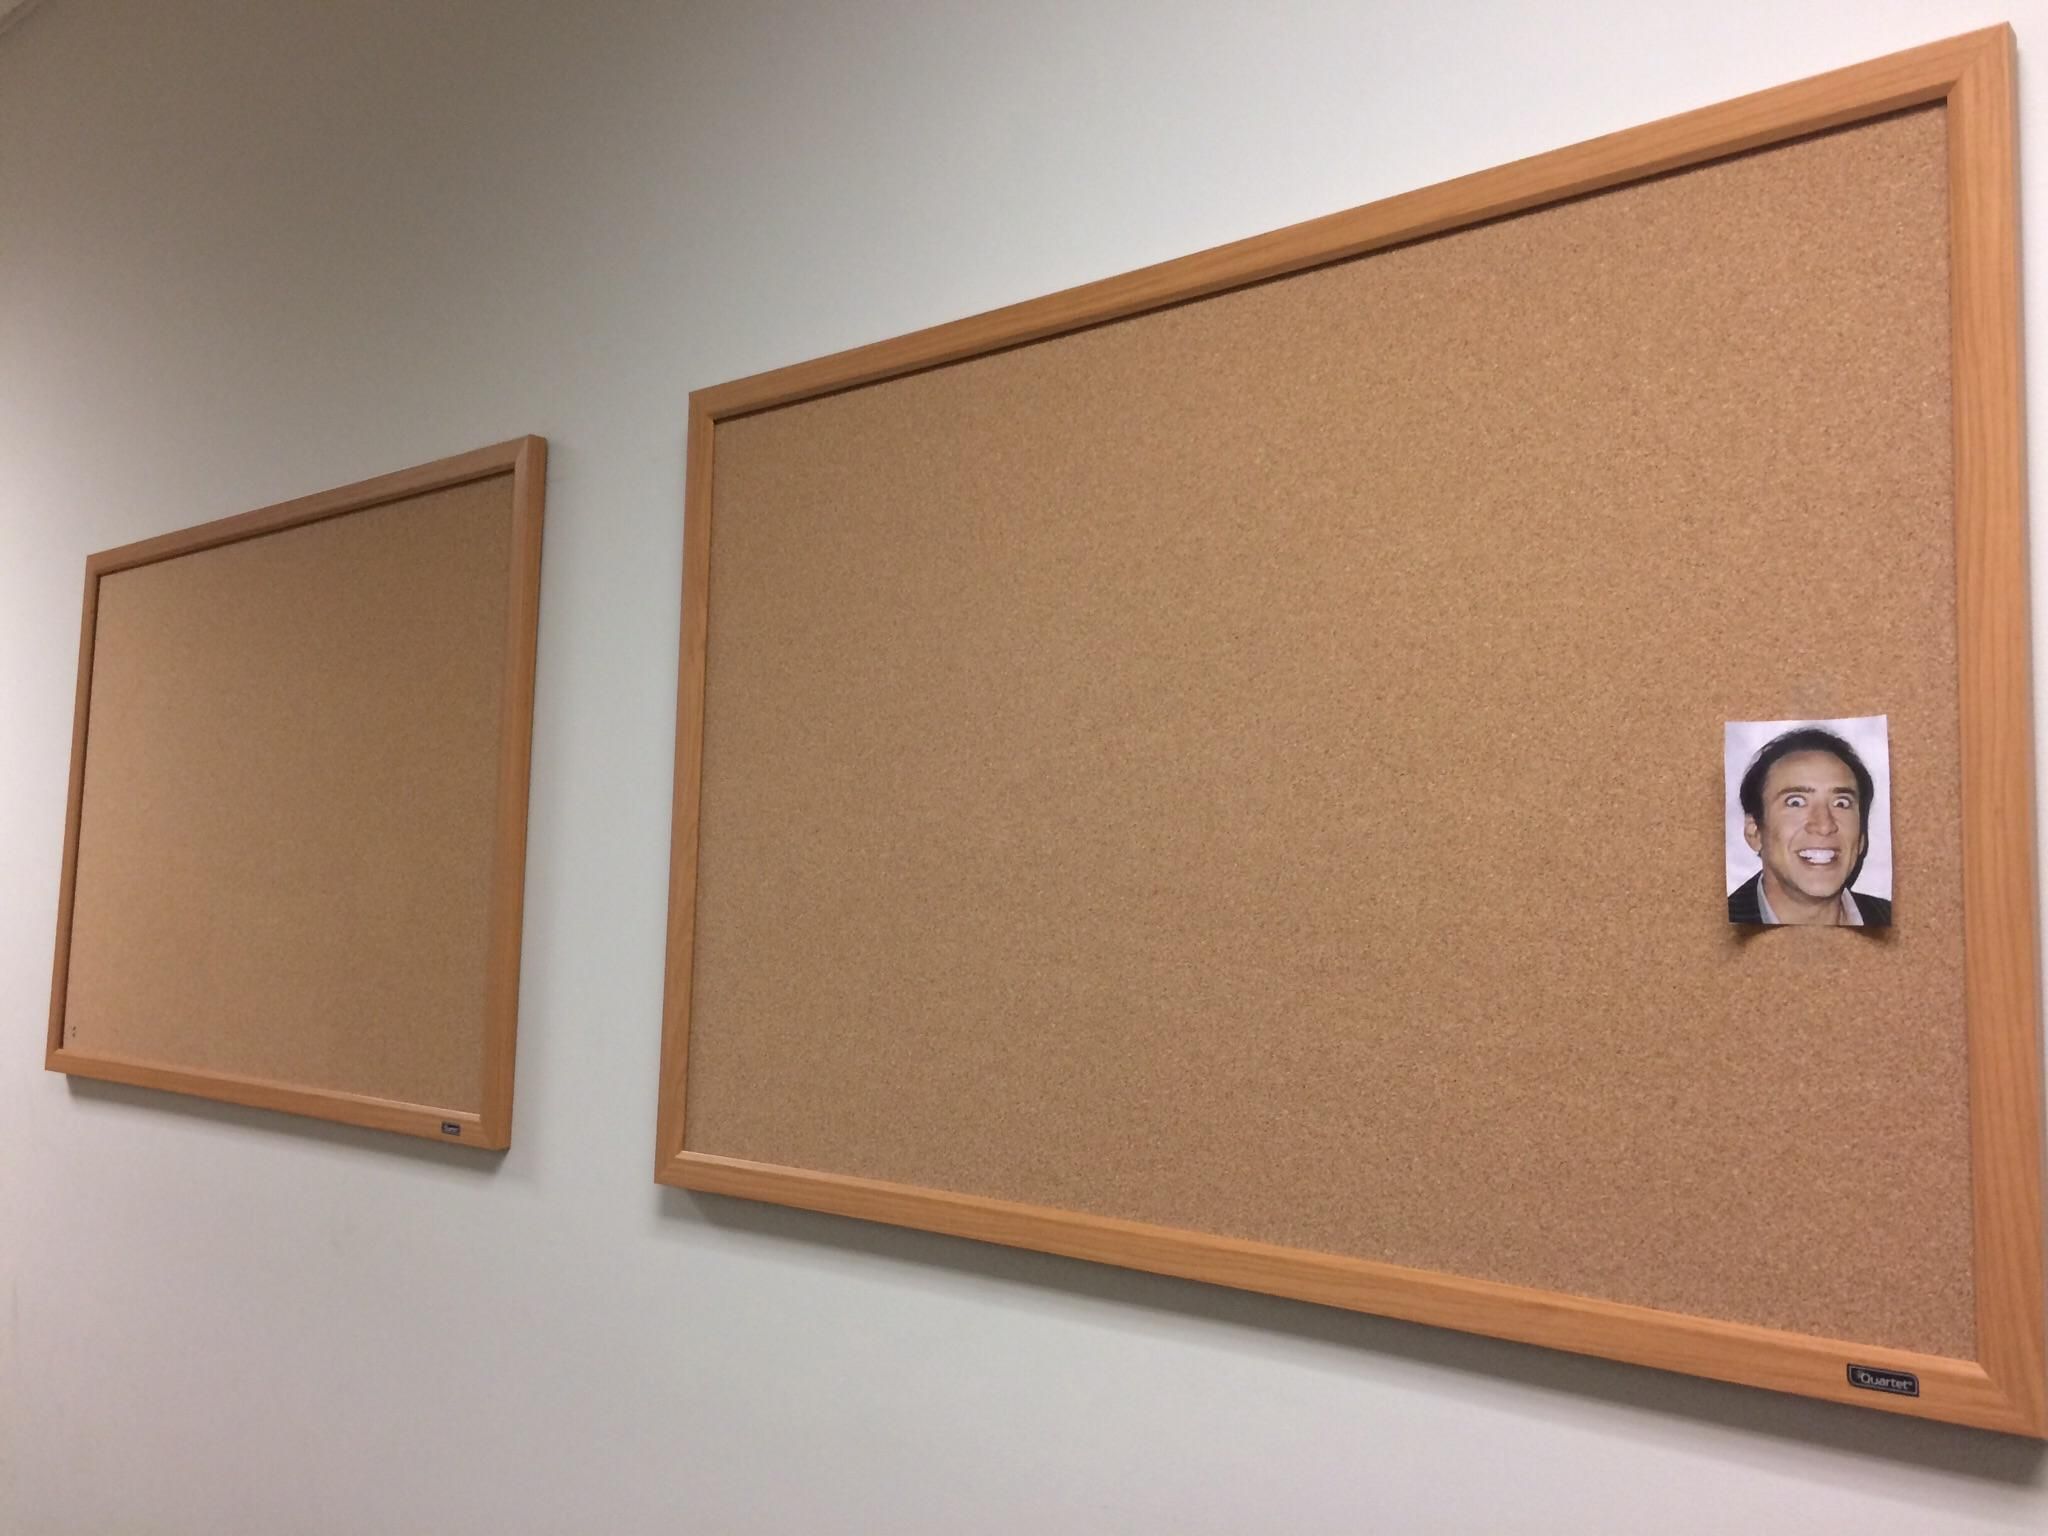 My job put up poster boards so we could put up cute/fun office pictures. I got to it first.